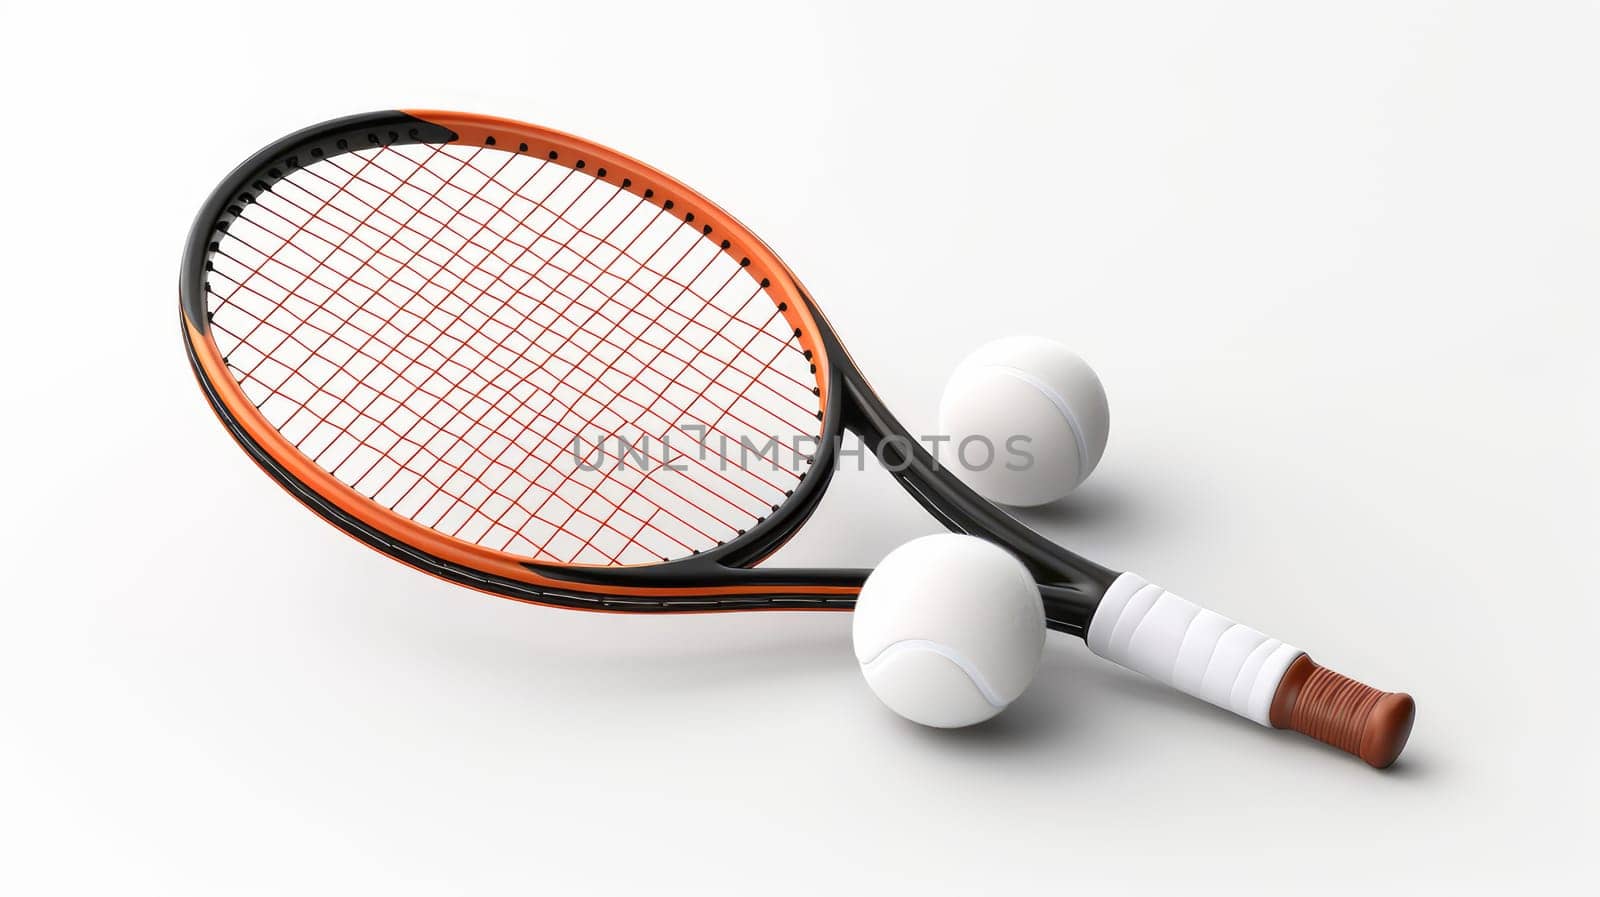 Tennis rackets and ball on white background. Playing sports, healthy lifestyle, physical activity, training, active lifestyle, competition, Preparation for big sports.